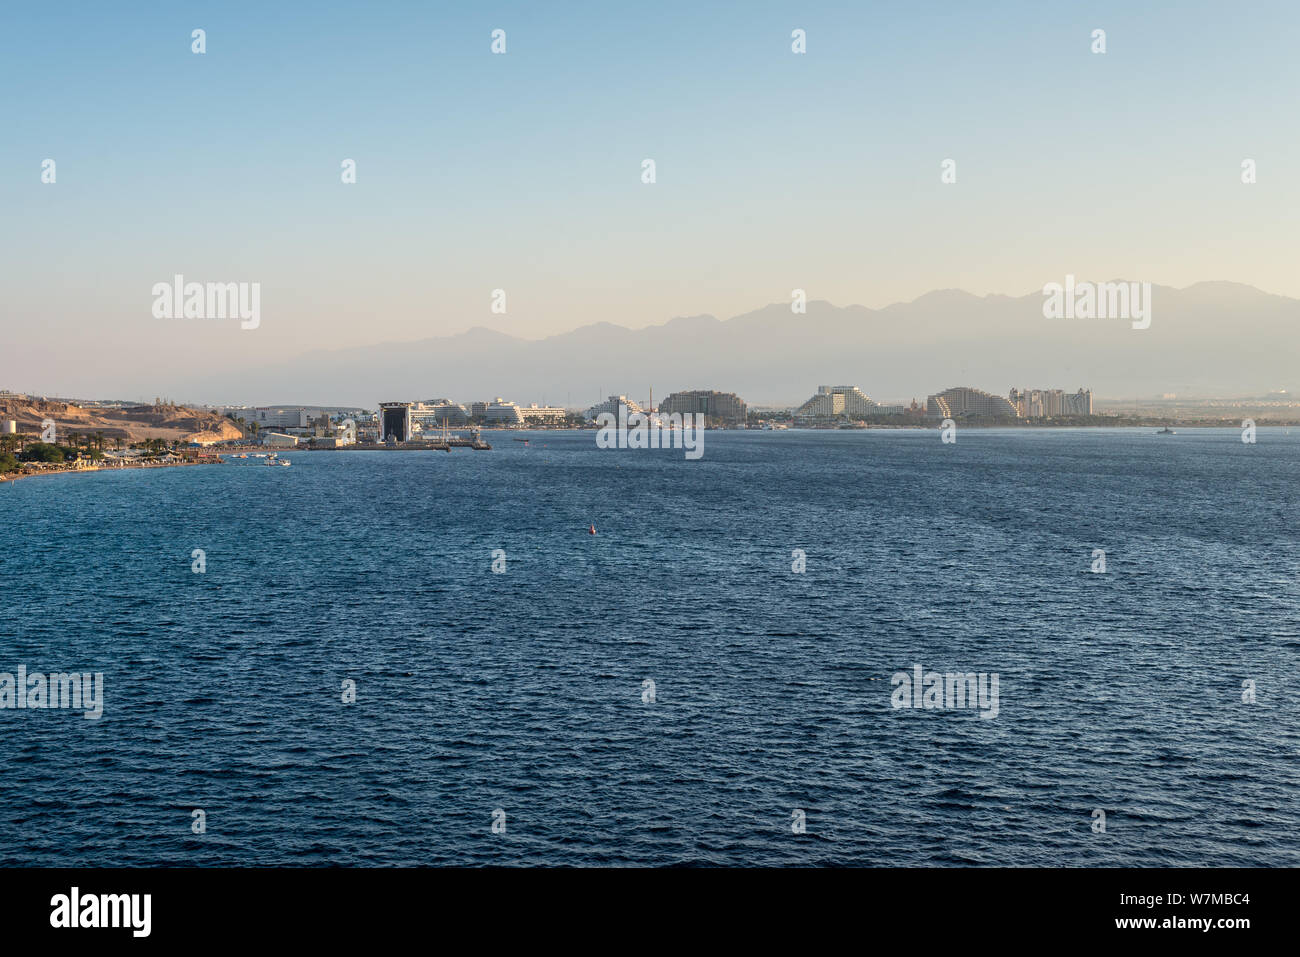 Eilat, Israel - November 7, 2017:  Panoramic view from cargo port on Eilat city - famous tourist and resort place in Israel. Stock Photo